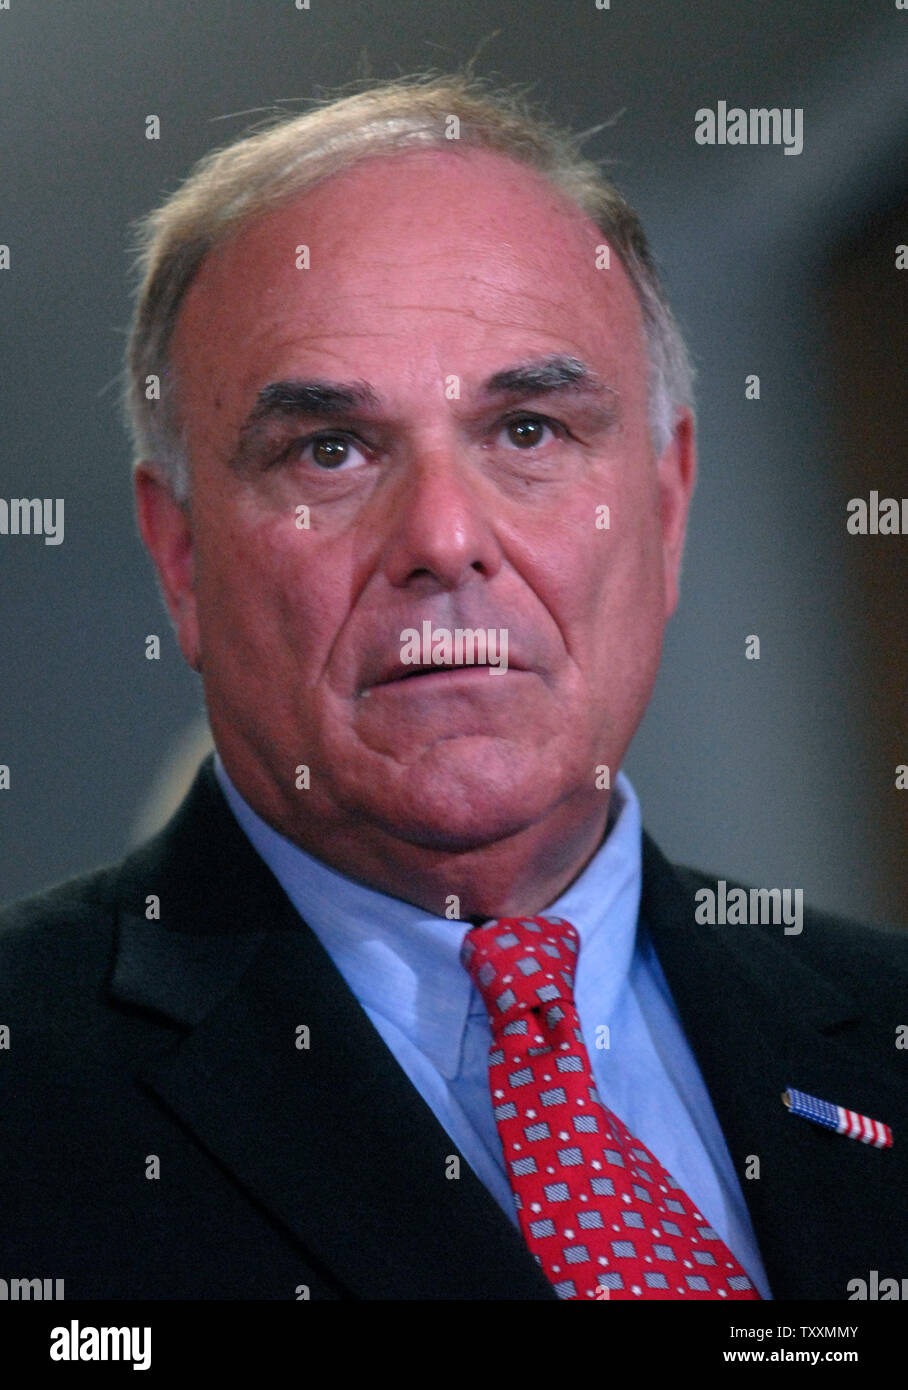 Pennsylvania Governor Ed Rendell speaks about the Nickel Mines School House shooting and Charles Roberts IV, the gunman who barricaded himself in the school killing several Amish girls 'execution style' before turning the gun on himself, at a press conference in Nickel Mines, Pennsylvania on October 3, 2006. (UPI Photo/Kevin Dietsch) Stock Photo